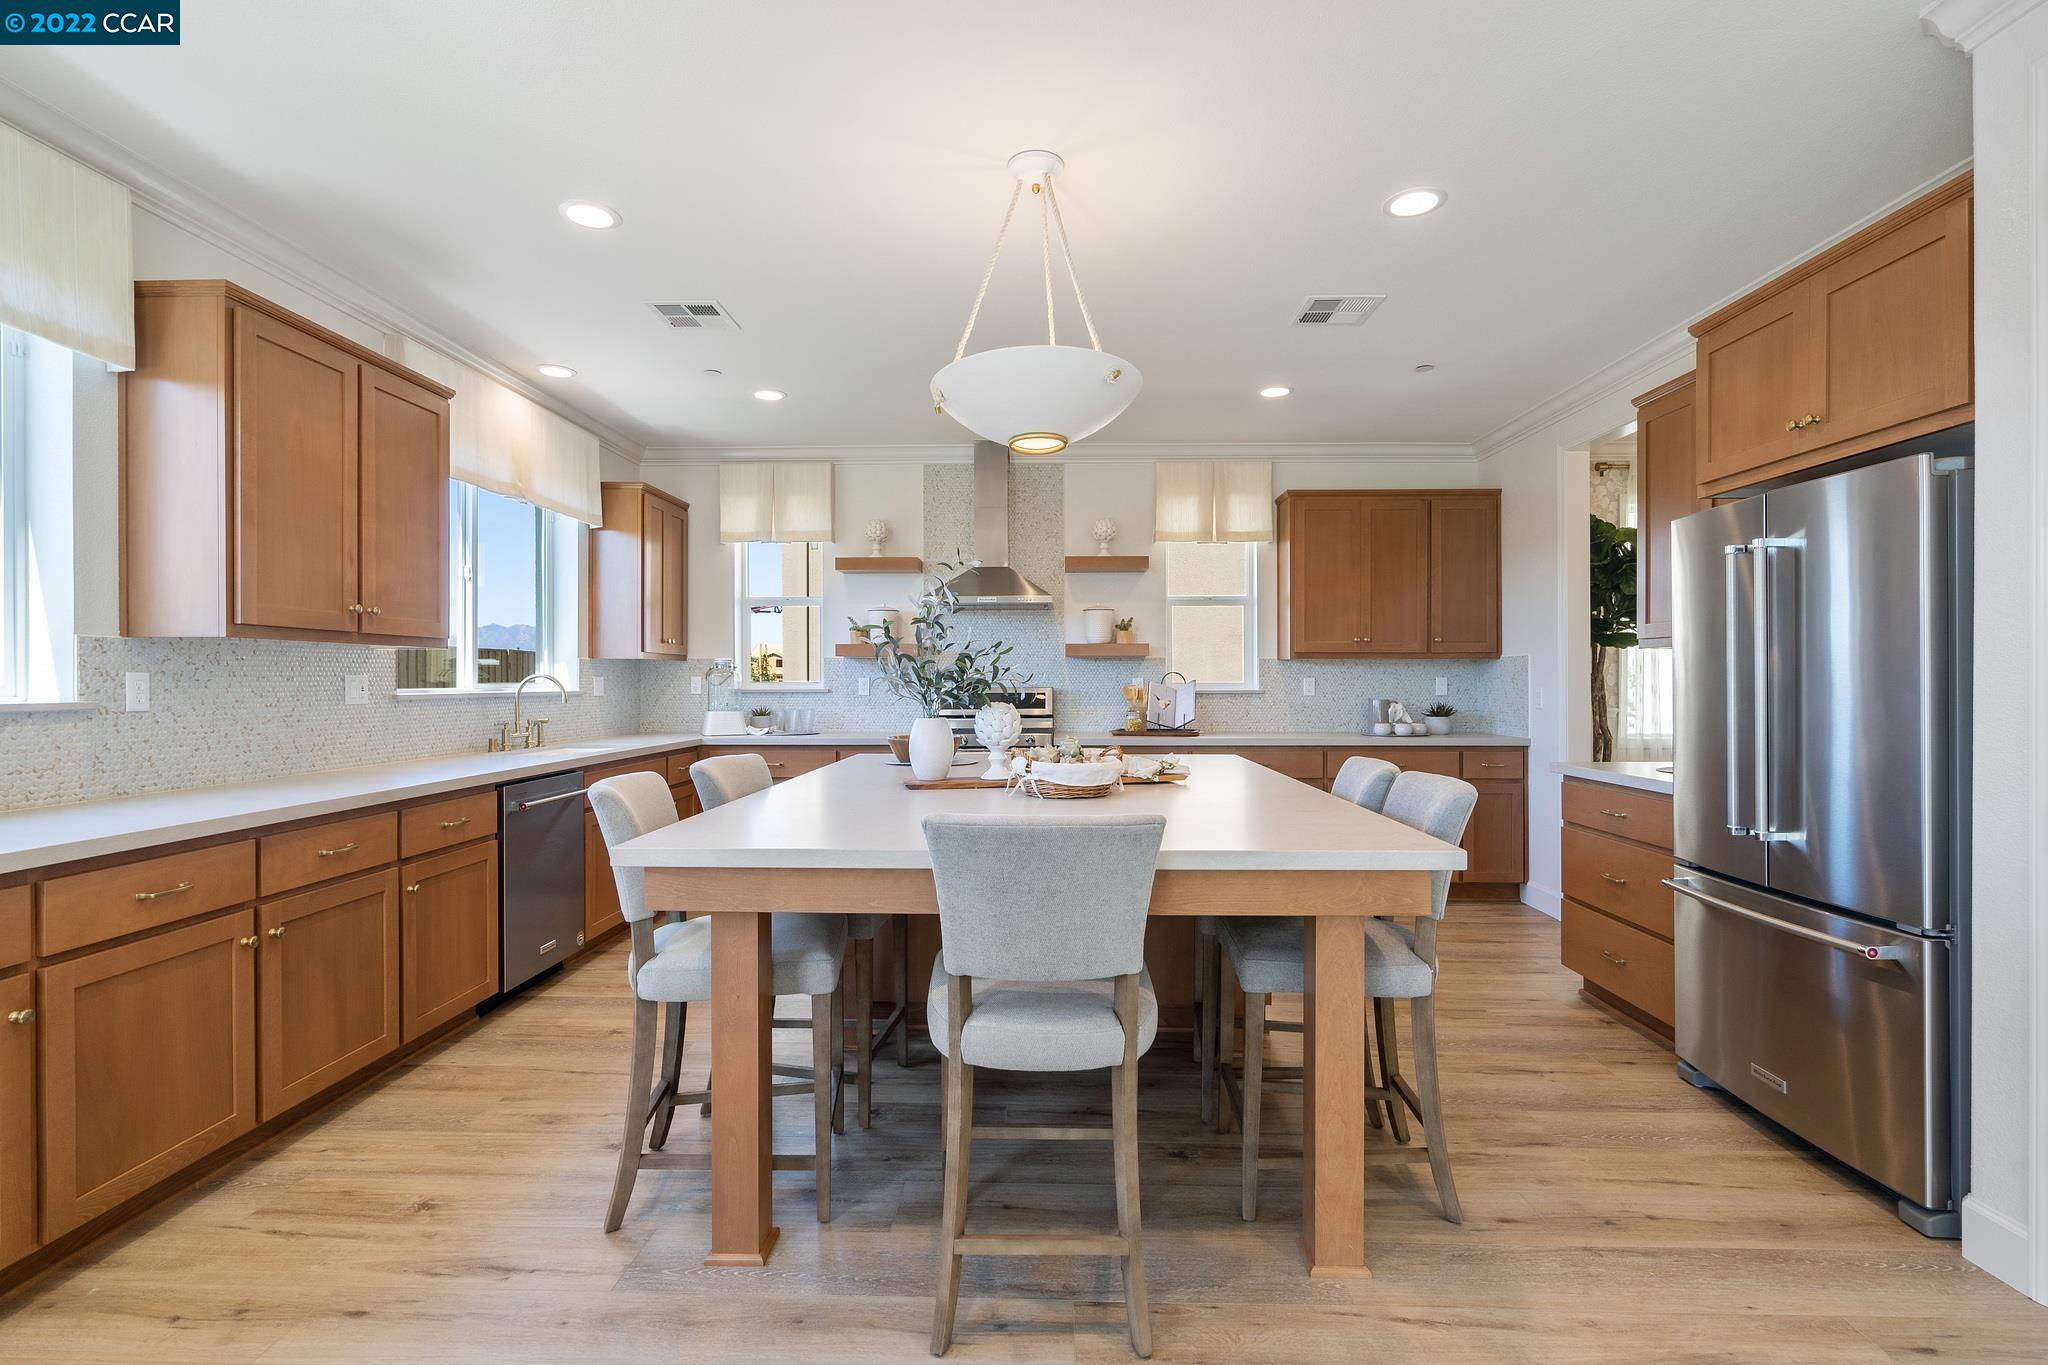 a kitchen with stainless steel appliances granite countertop a dining table chairs refrigerator sink and cabinets